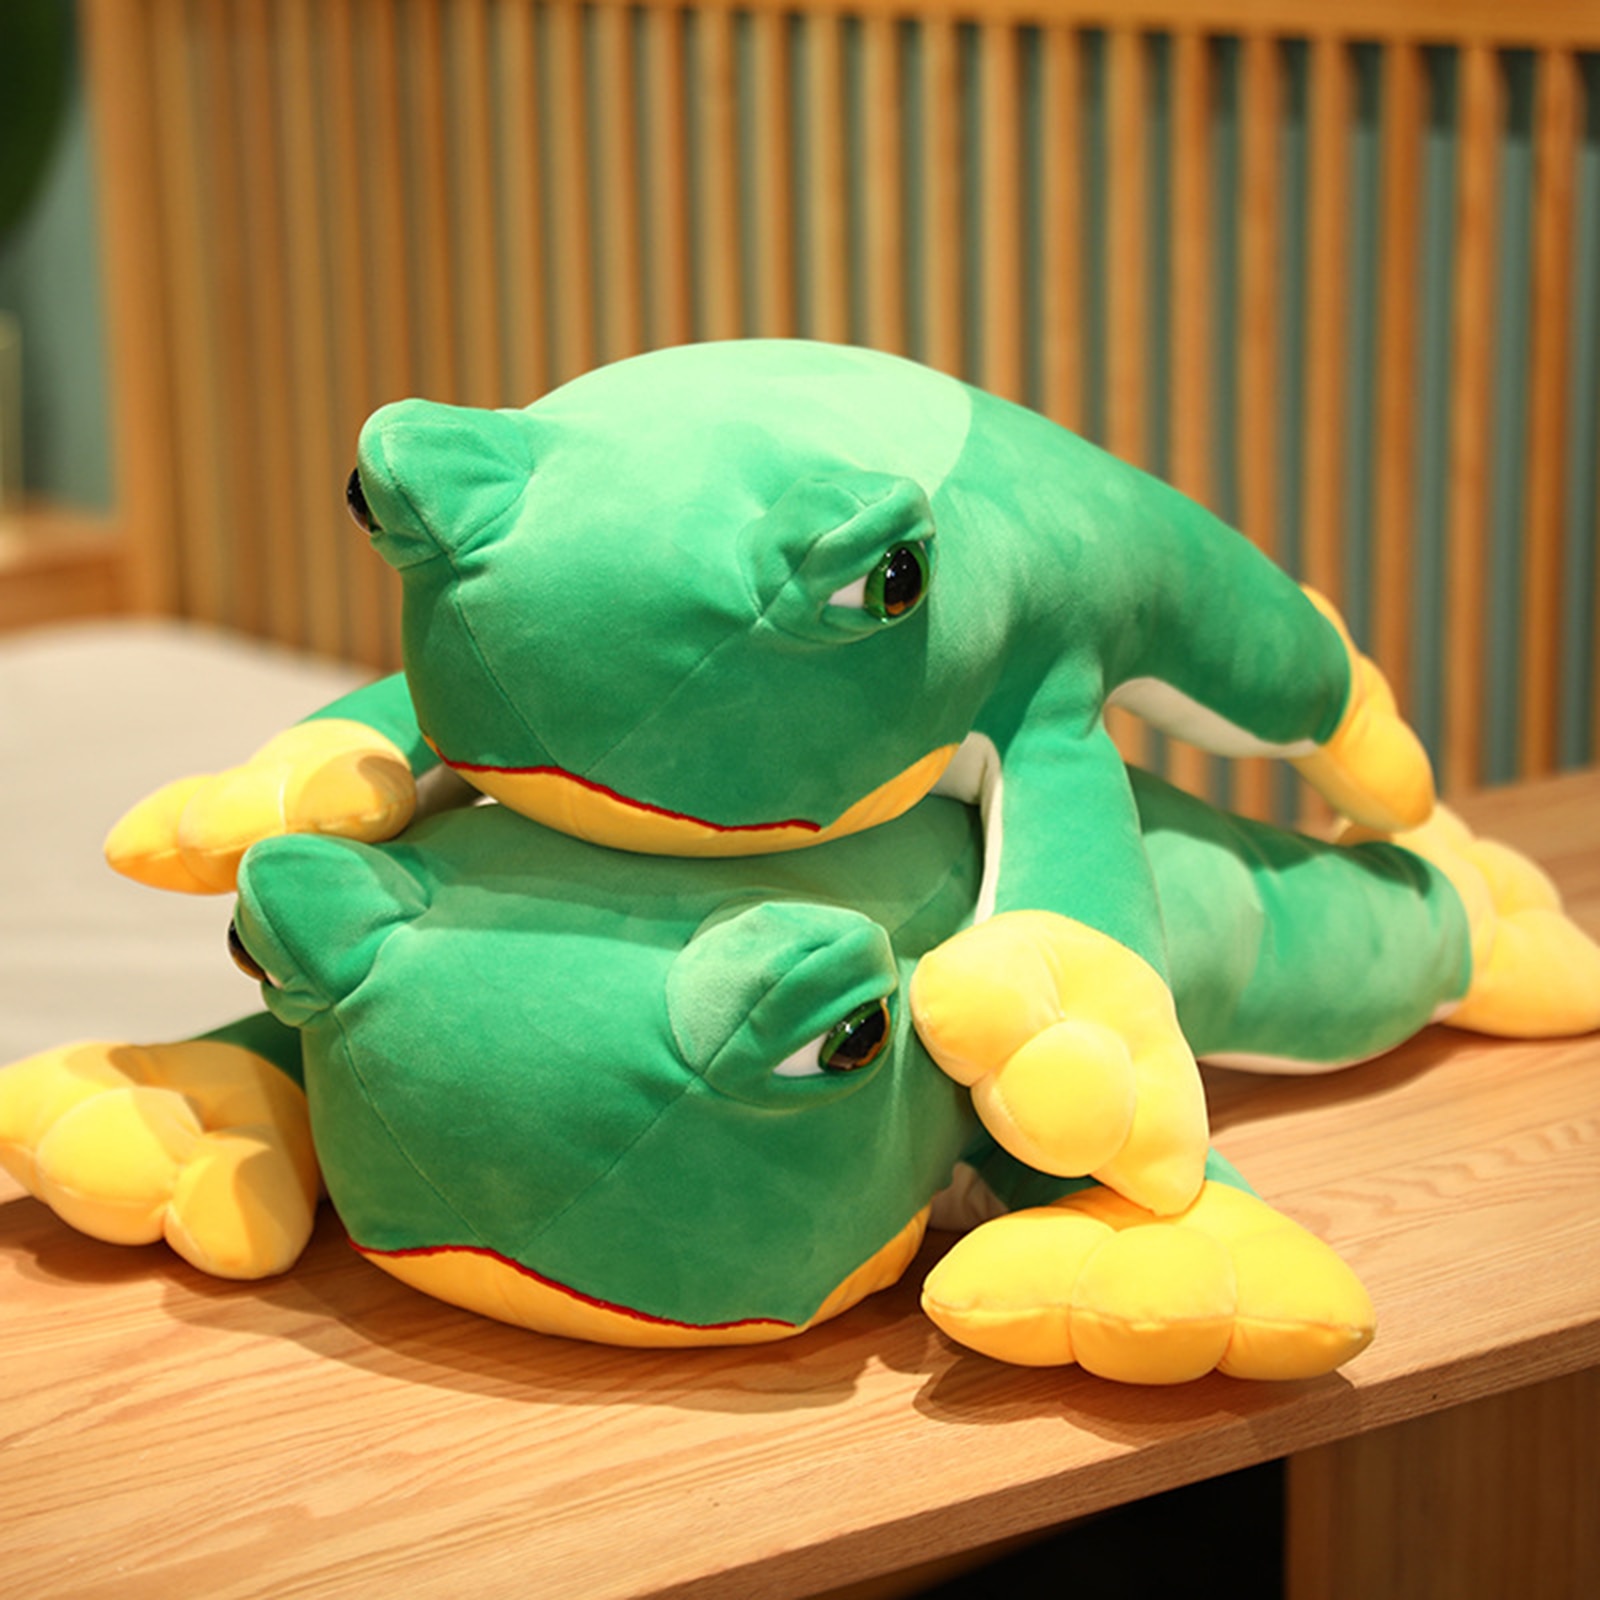 New 40CM Stuffed Animal Frog Throw Plush Pillow Doll Soft Fluffy Hugging Cushion Present For Every 1